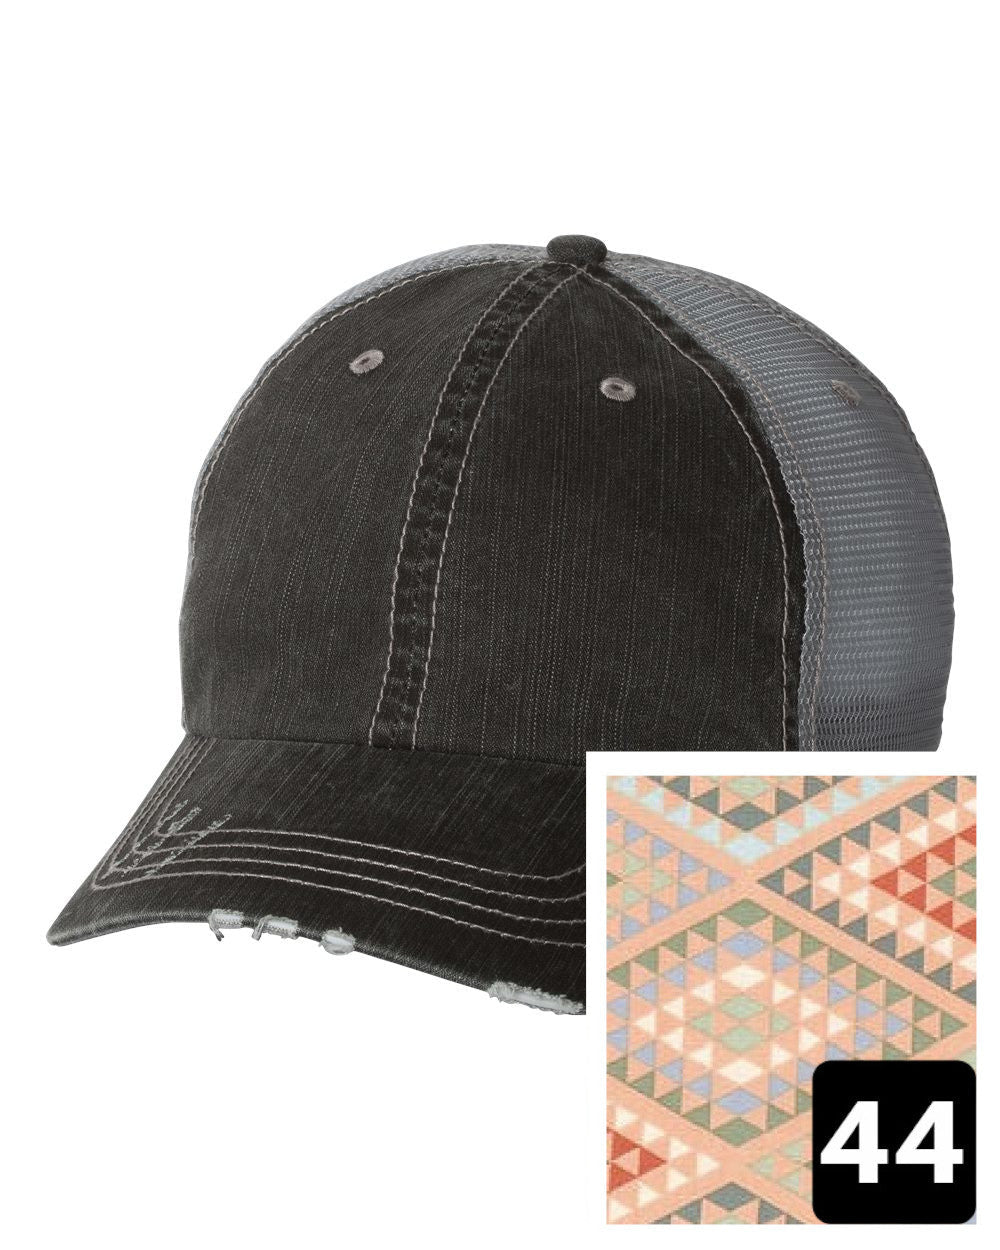 gray distressed trucker hat with navy coral and white chevron fabric state of Oklahoma